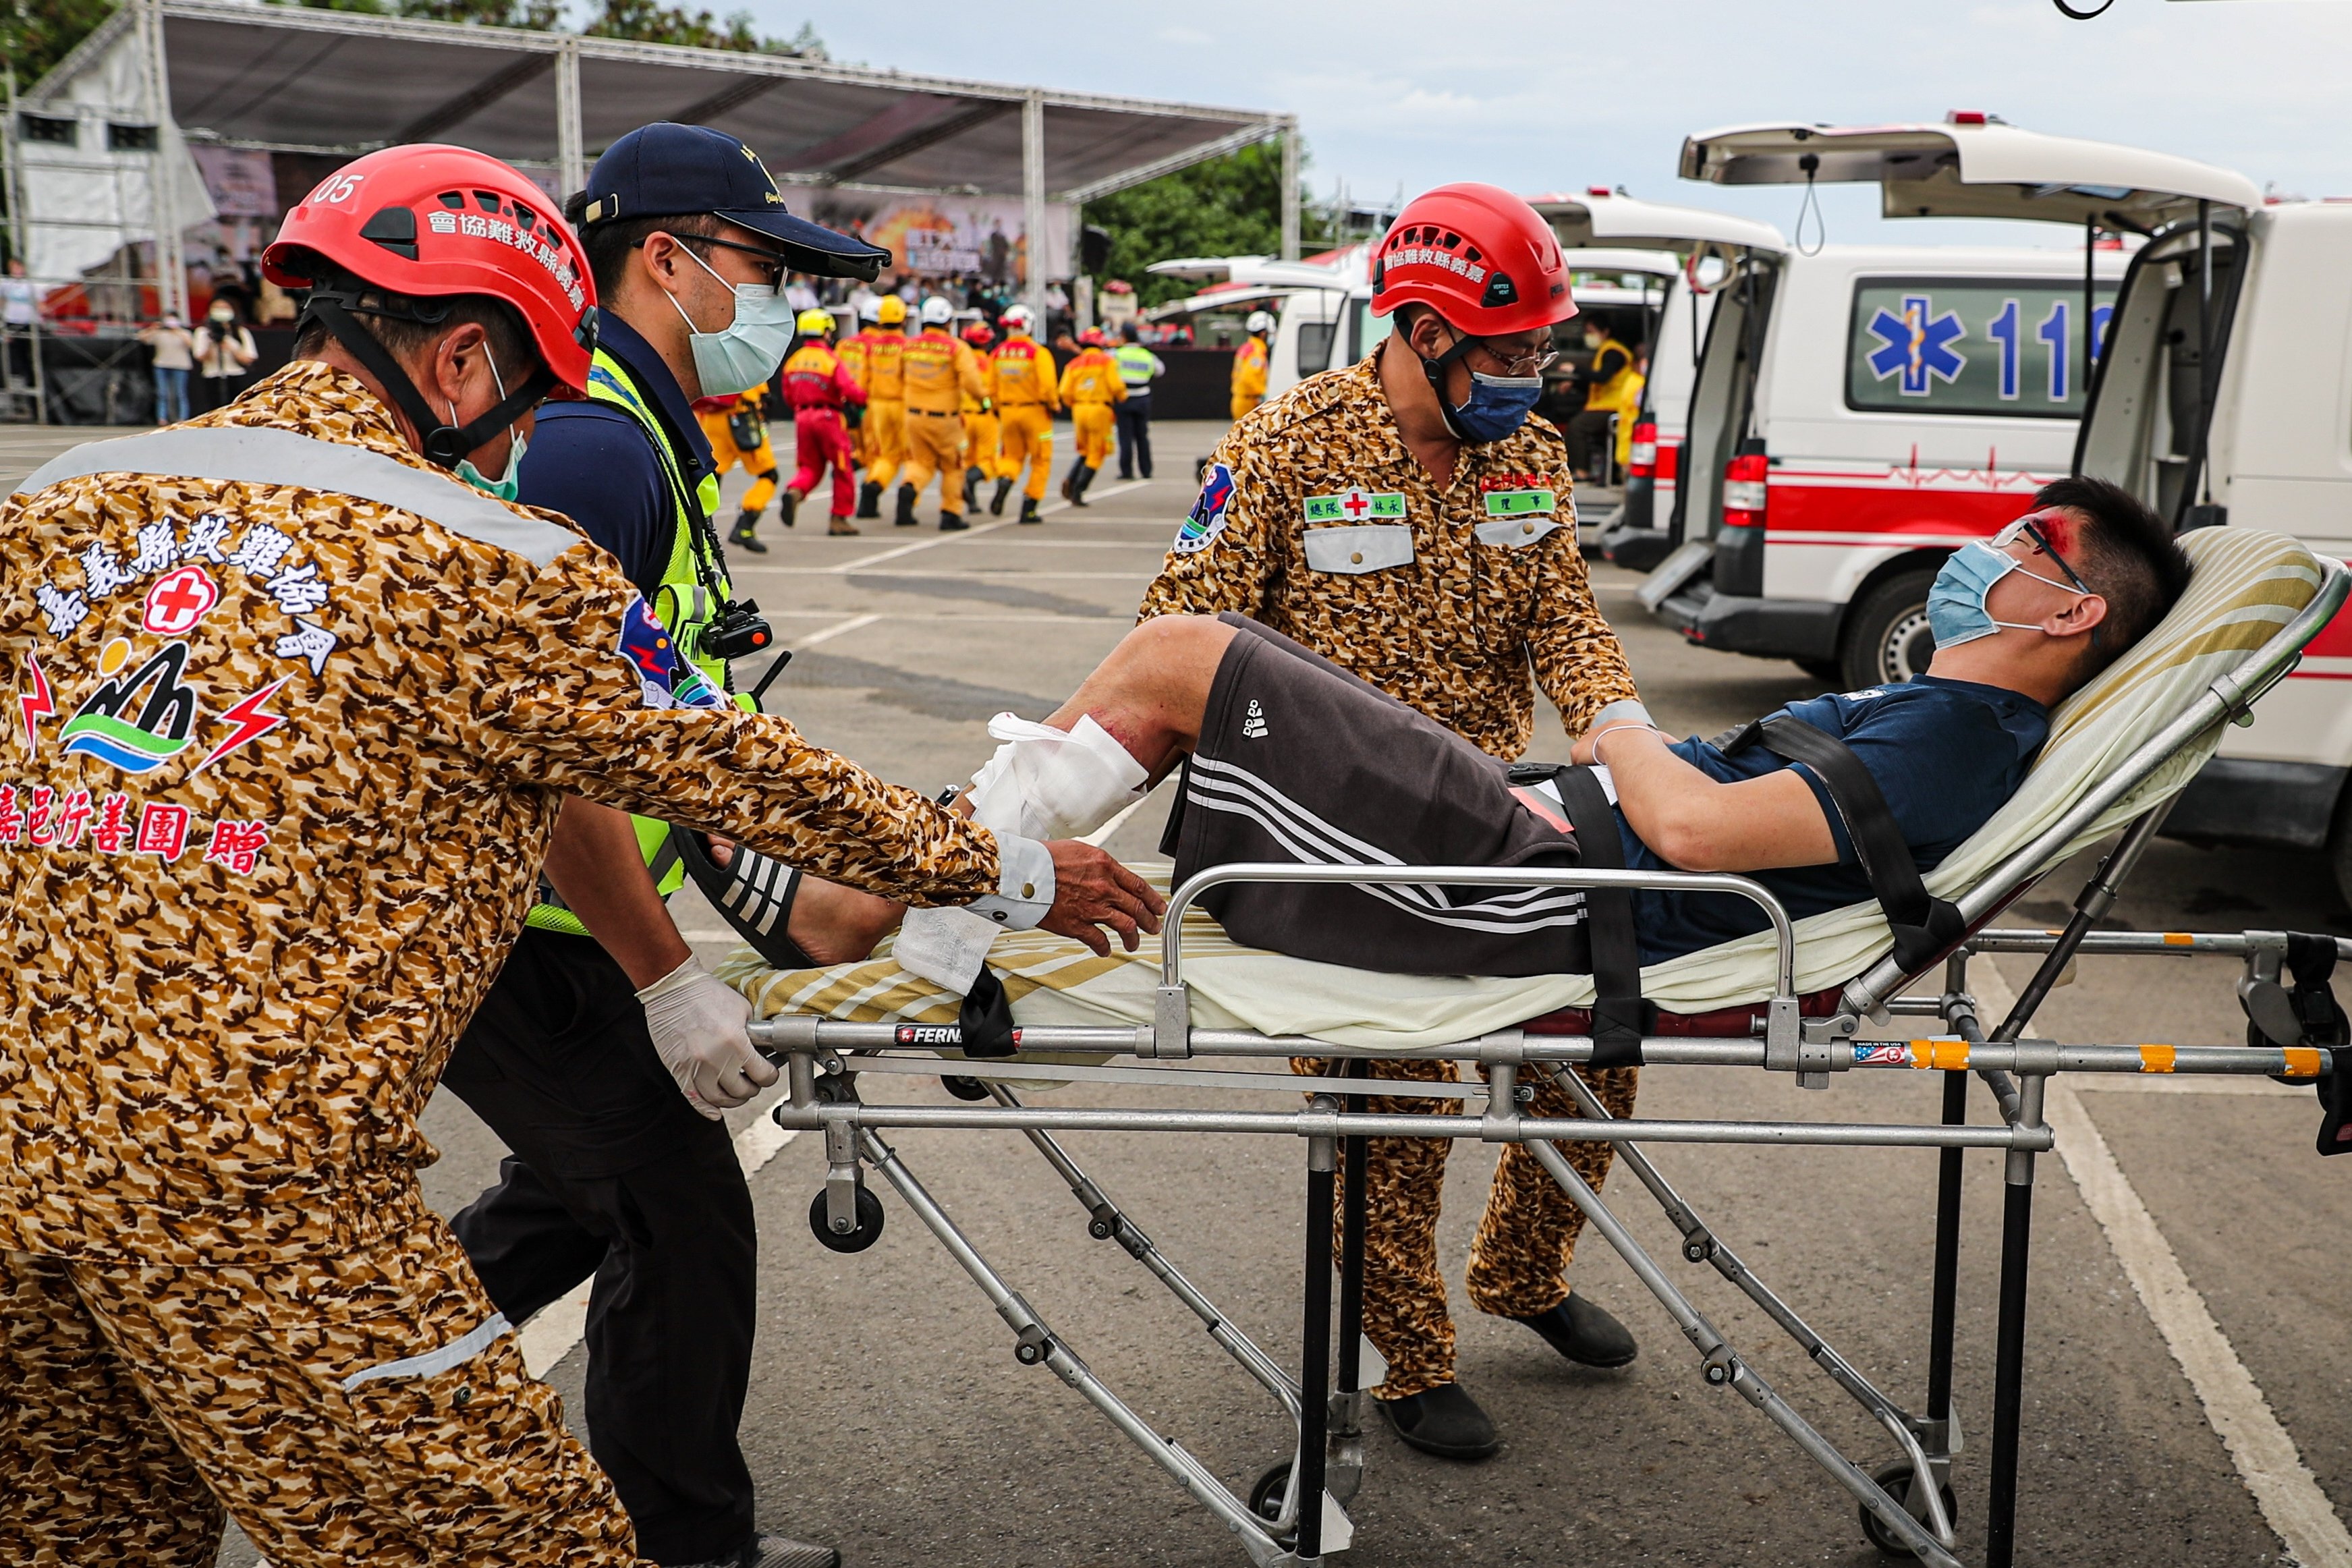 A mock victim is carried to an ambulance during the Min-An Drill or Emergency response drill to prepare civil servants how to react in the event of an attack, in Chiayi, Southern Taiwan, June 9, 2022. (EPA Photo)